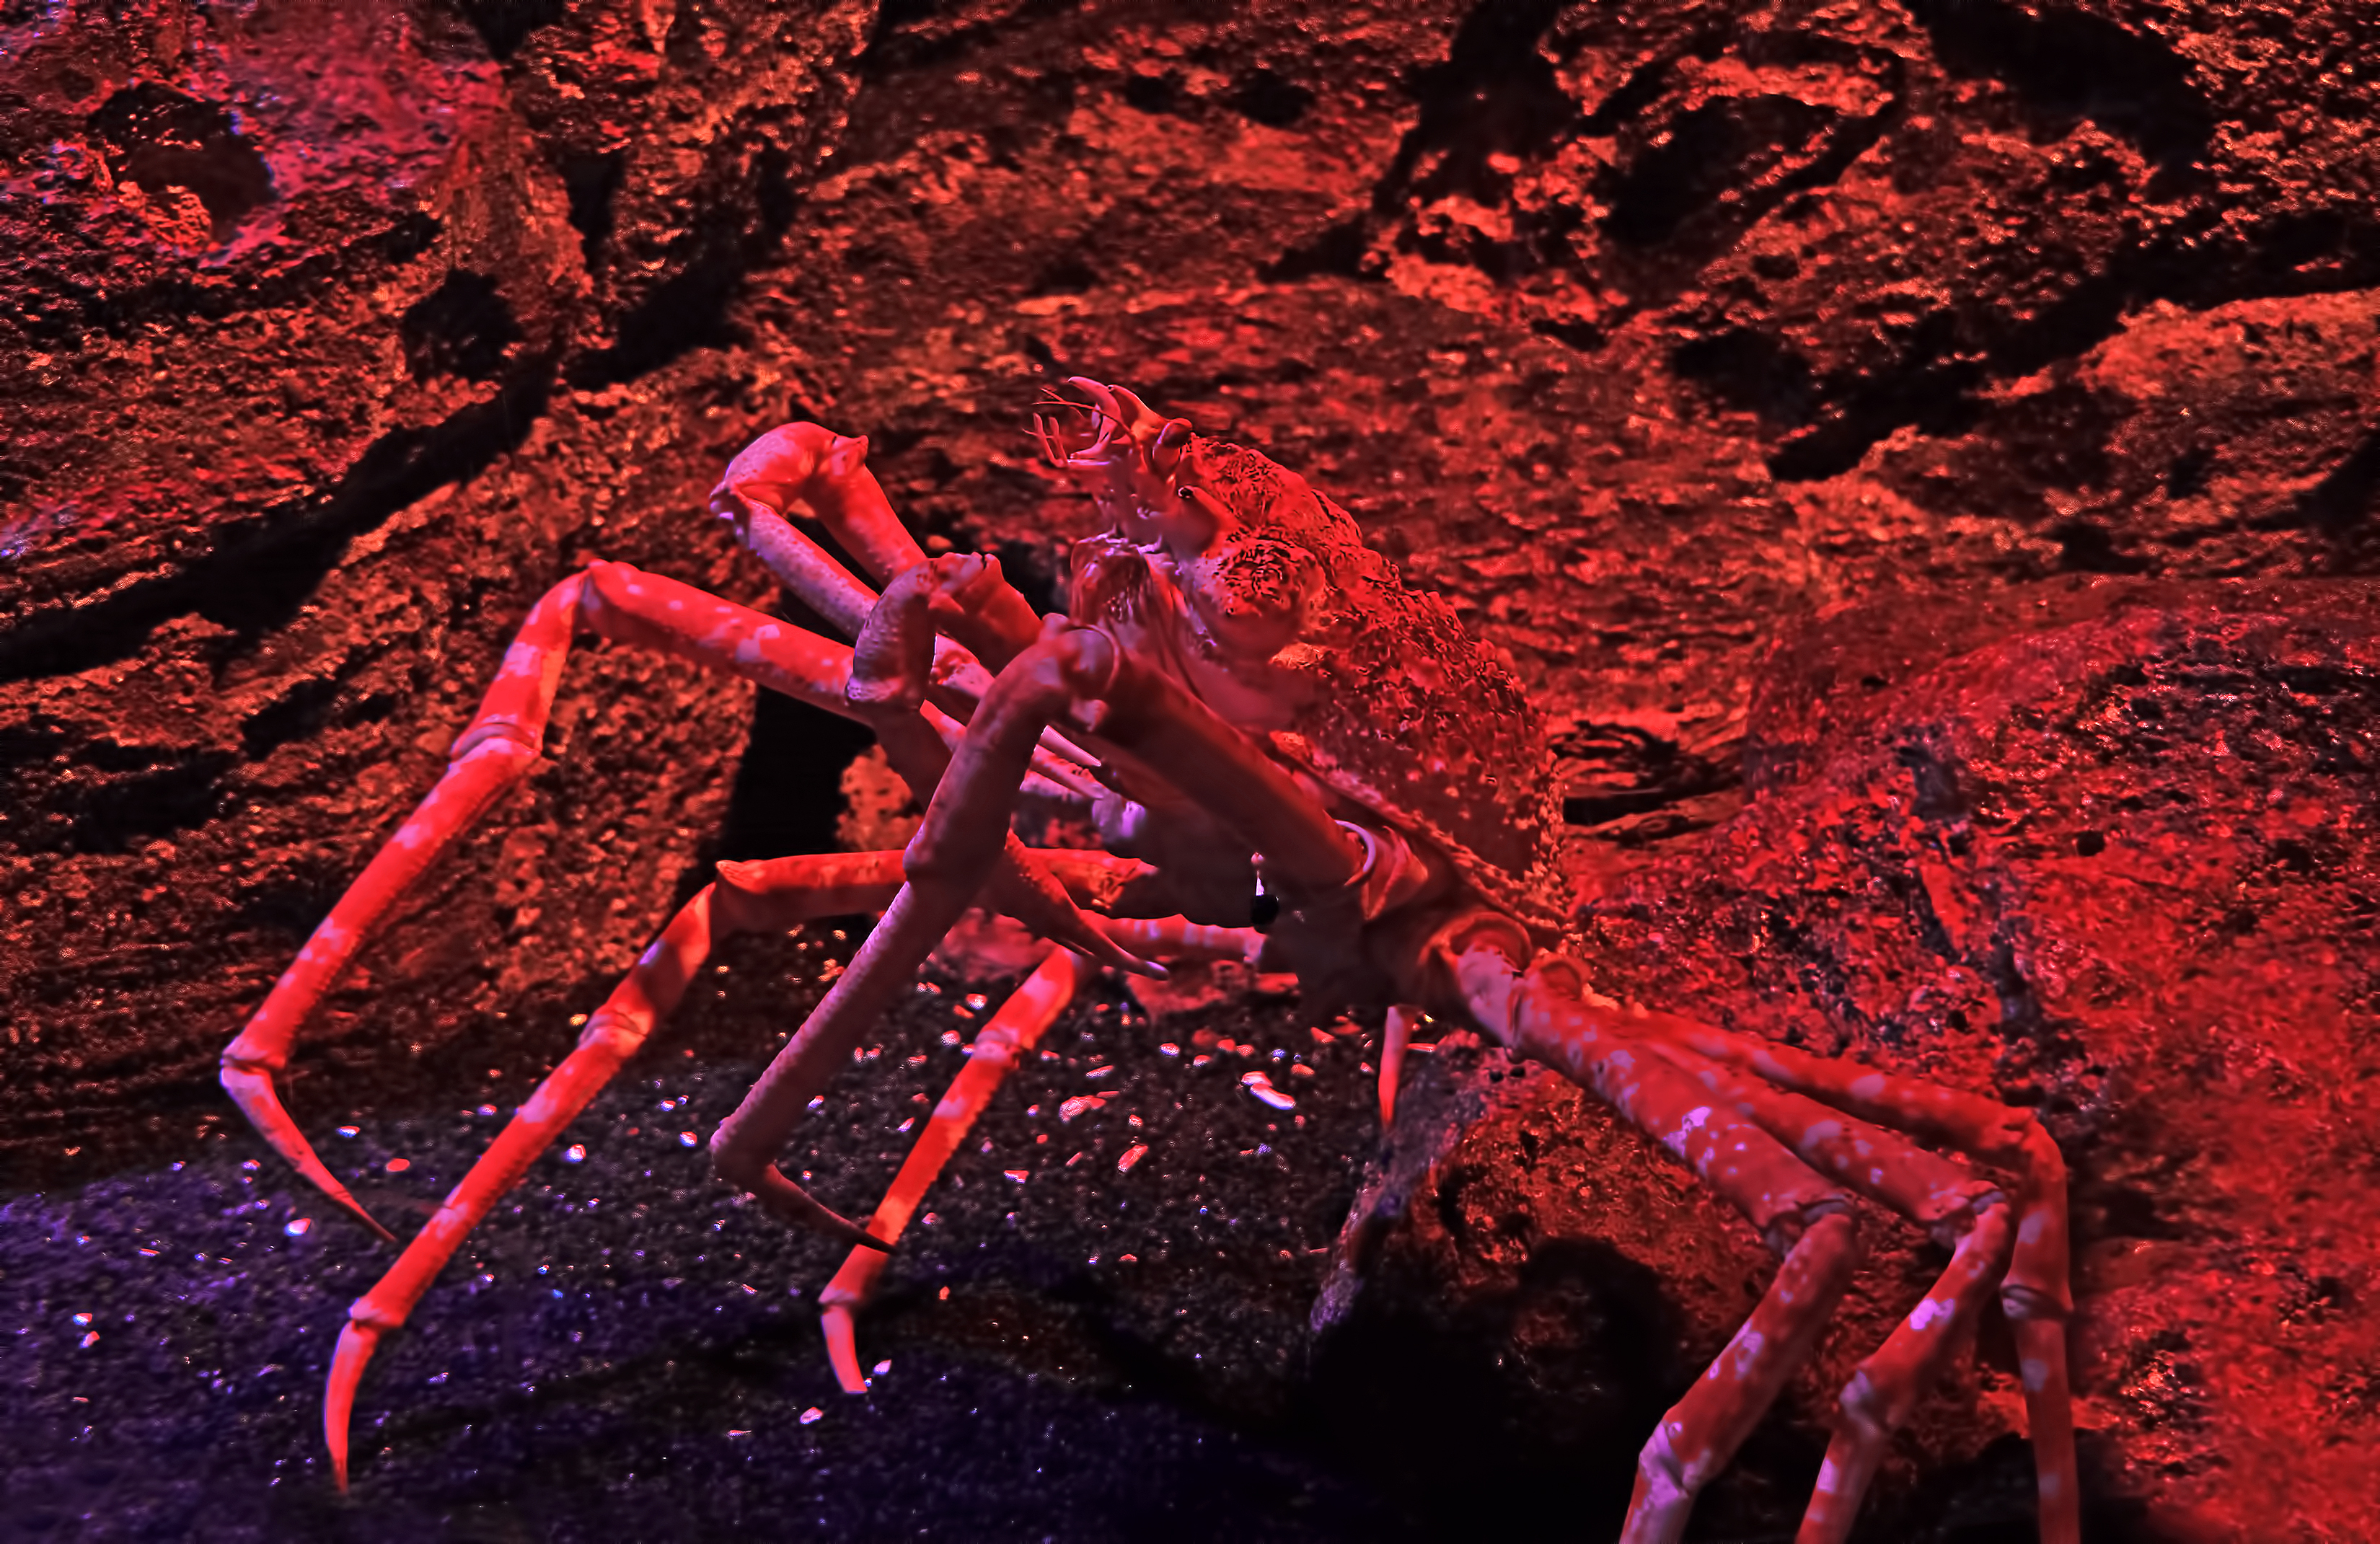 Photo of Japanese spider crab. | Source: Shutterstock